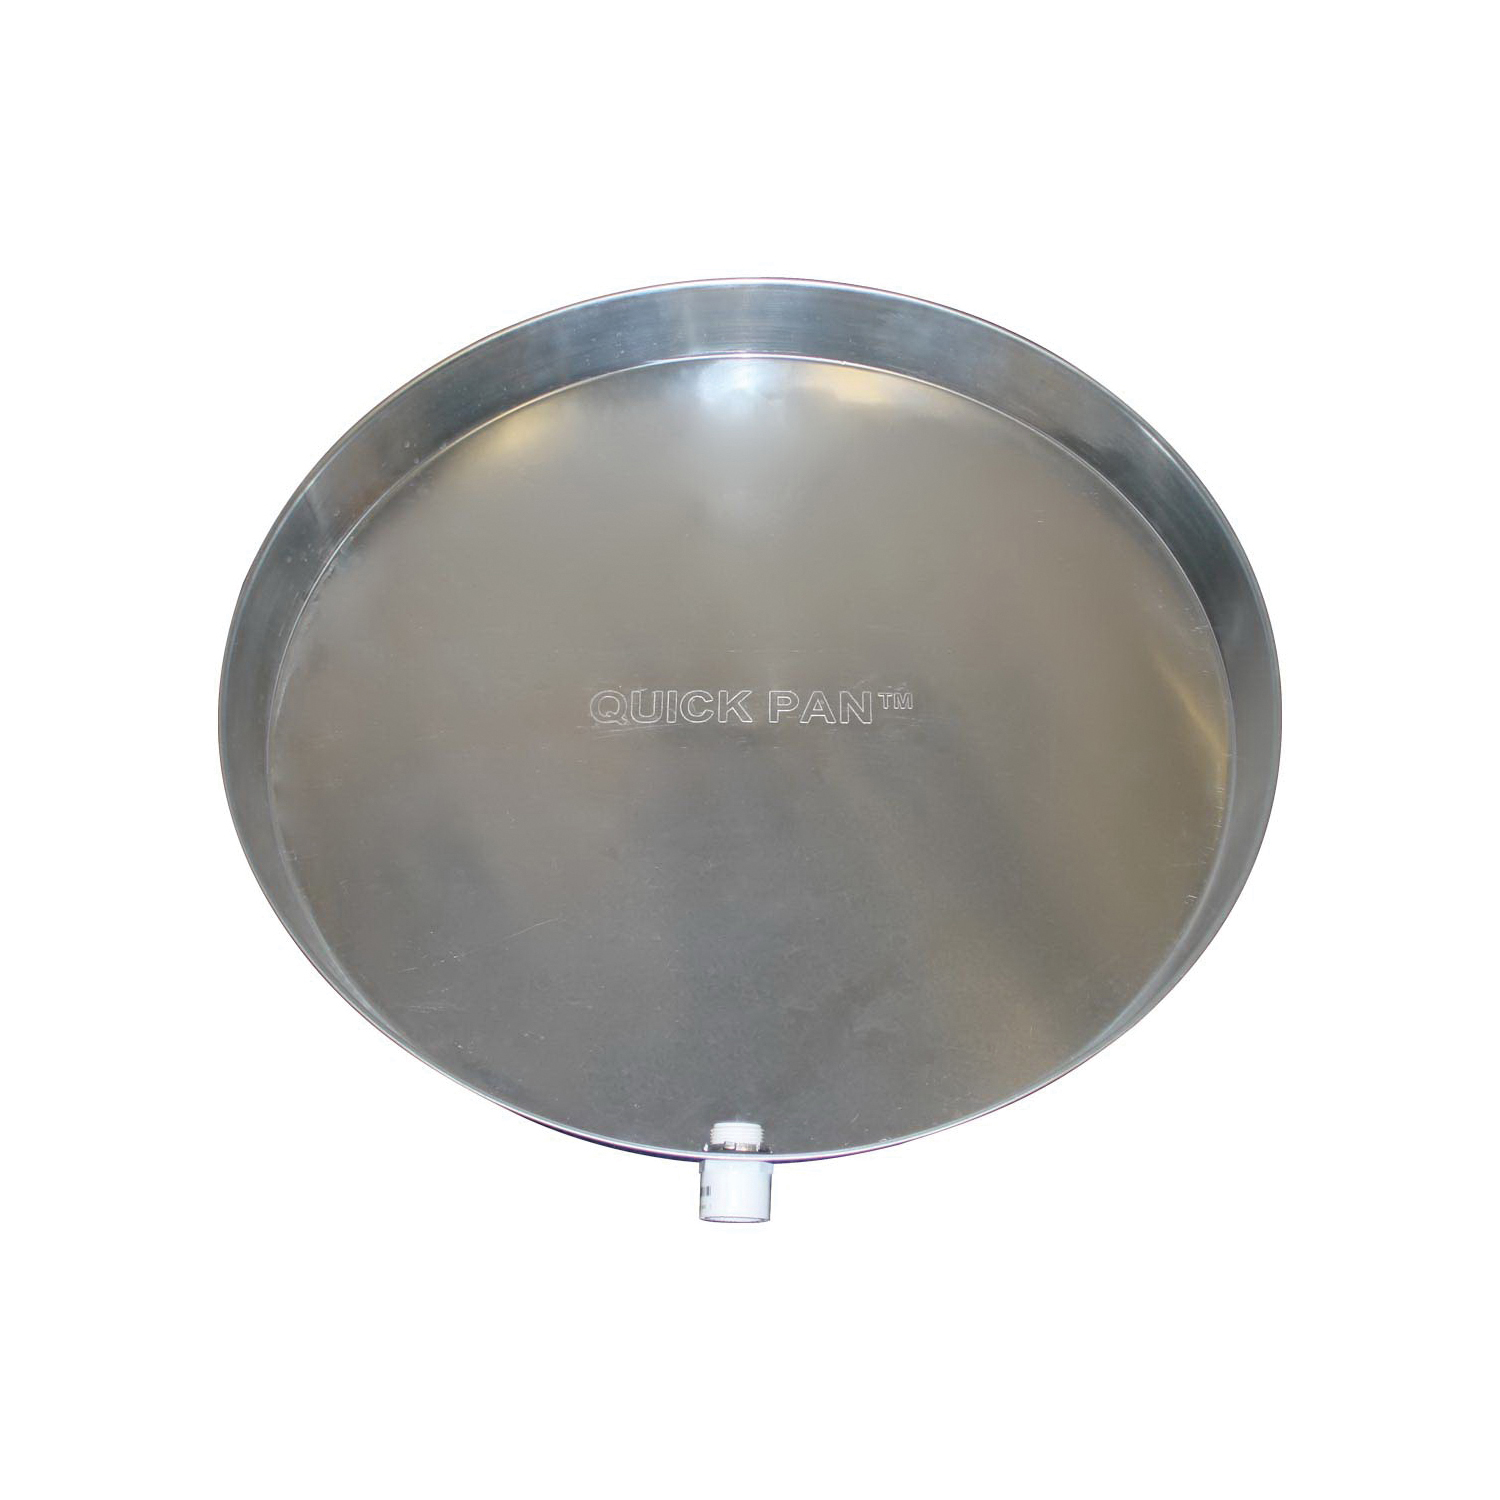 Holdrite® Quick PAN™ QP-28 Drain Pan, For Use With: Electric and Gas Water Heater, Aluminum, Domestic